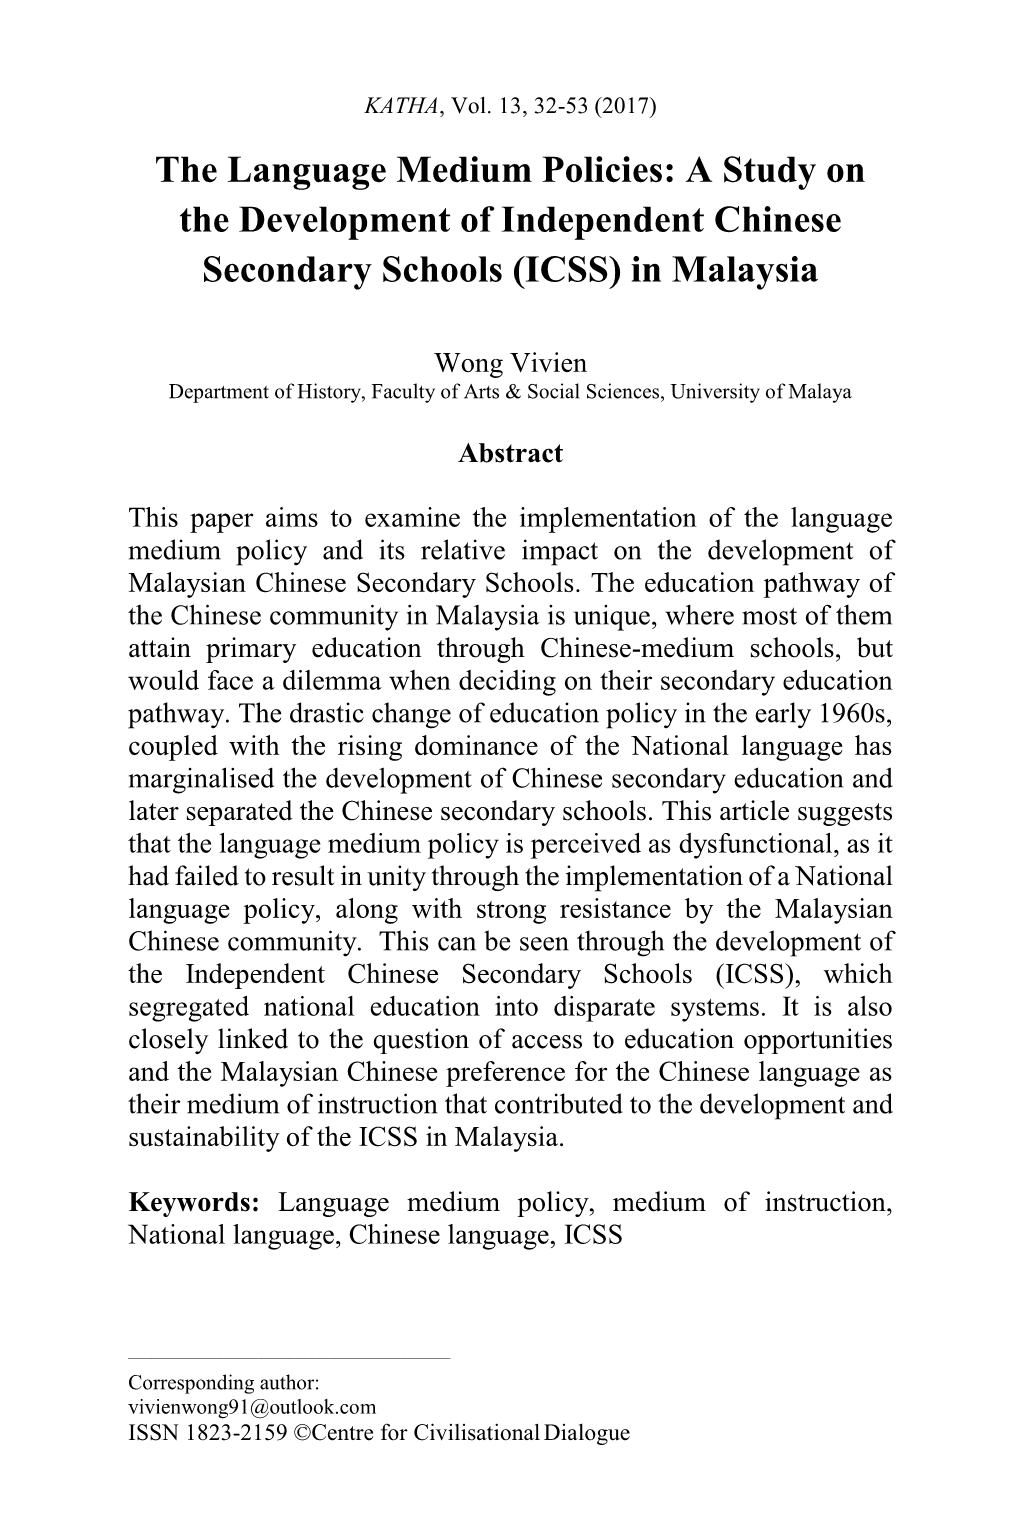 The Language Medium Policies: a Study on the Development of Independent Chinese Secondary Schools (ICSS) in Malaysia